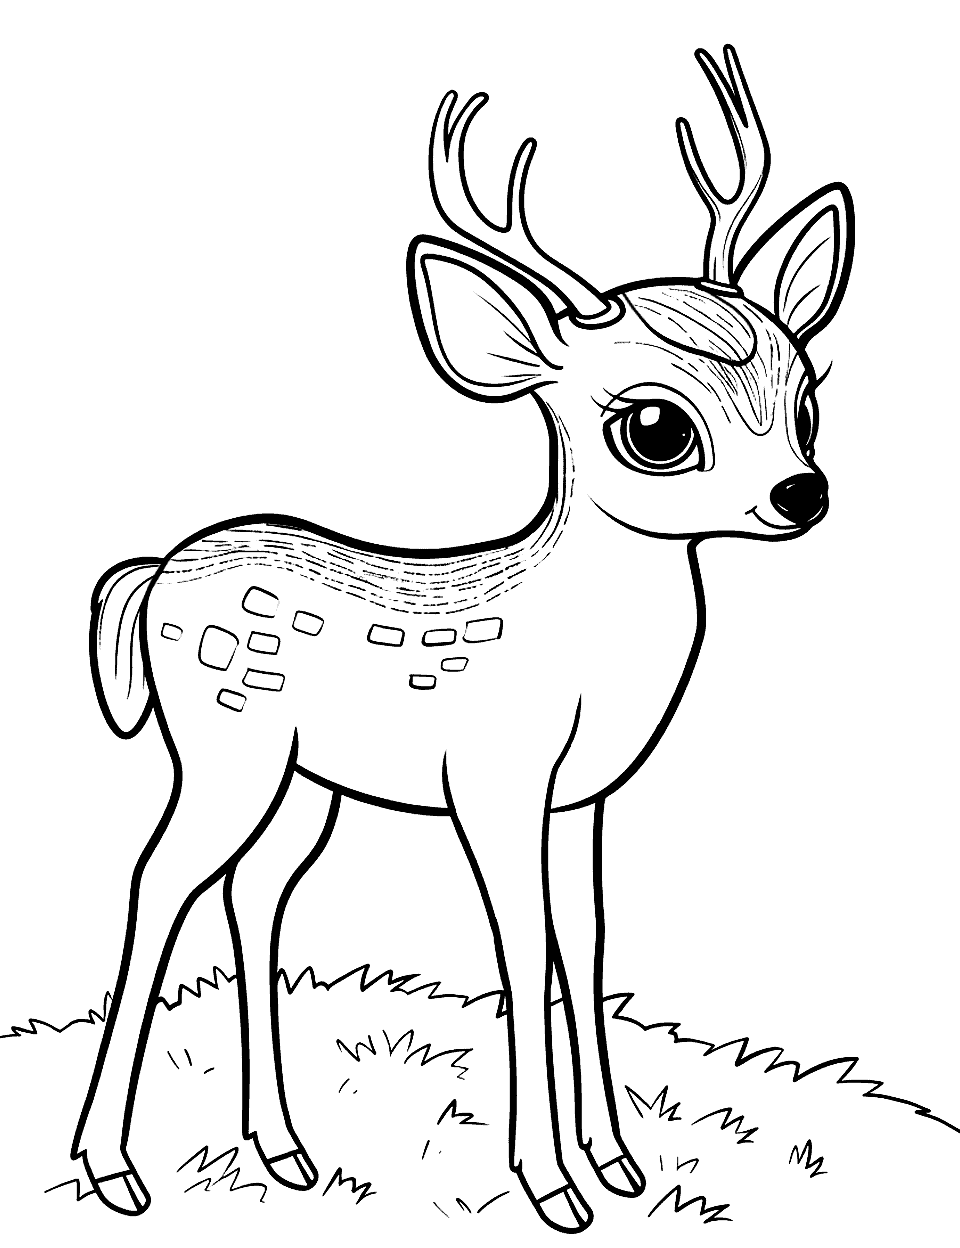 Kawaii Deer with Big Eyes Coloring Page - A deer with exaggerated big, cute kawaii eyes and a cheerful expression.